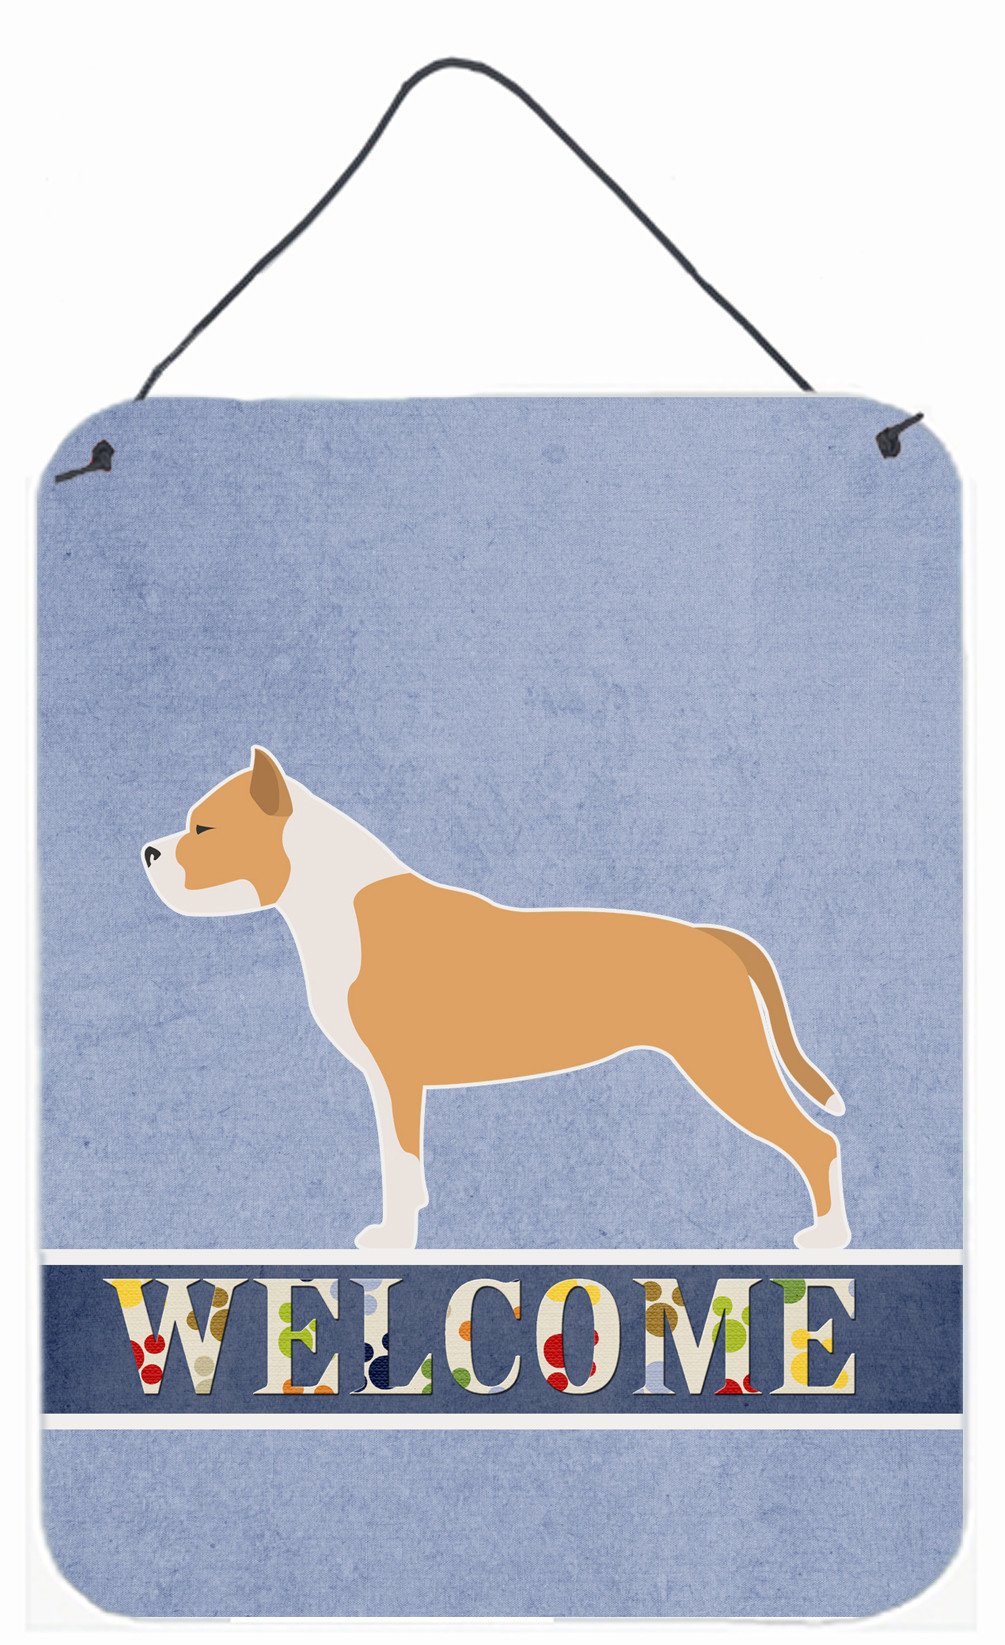 Staffordshire Bull Terrier Welcome Wall or Door Hanging Prints BB5558DS1216 by Caroline's Treasures